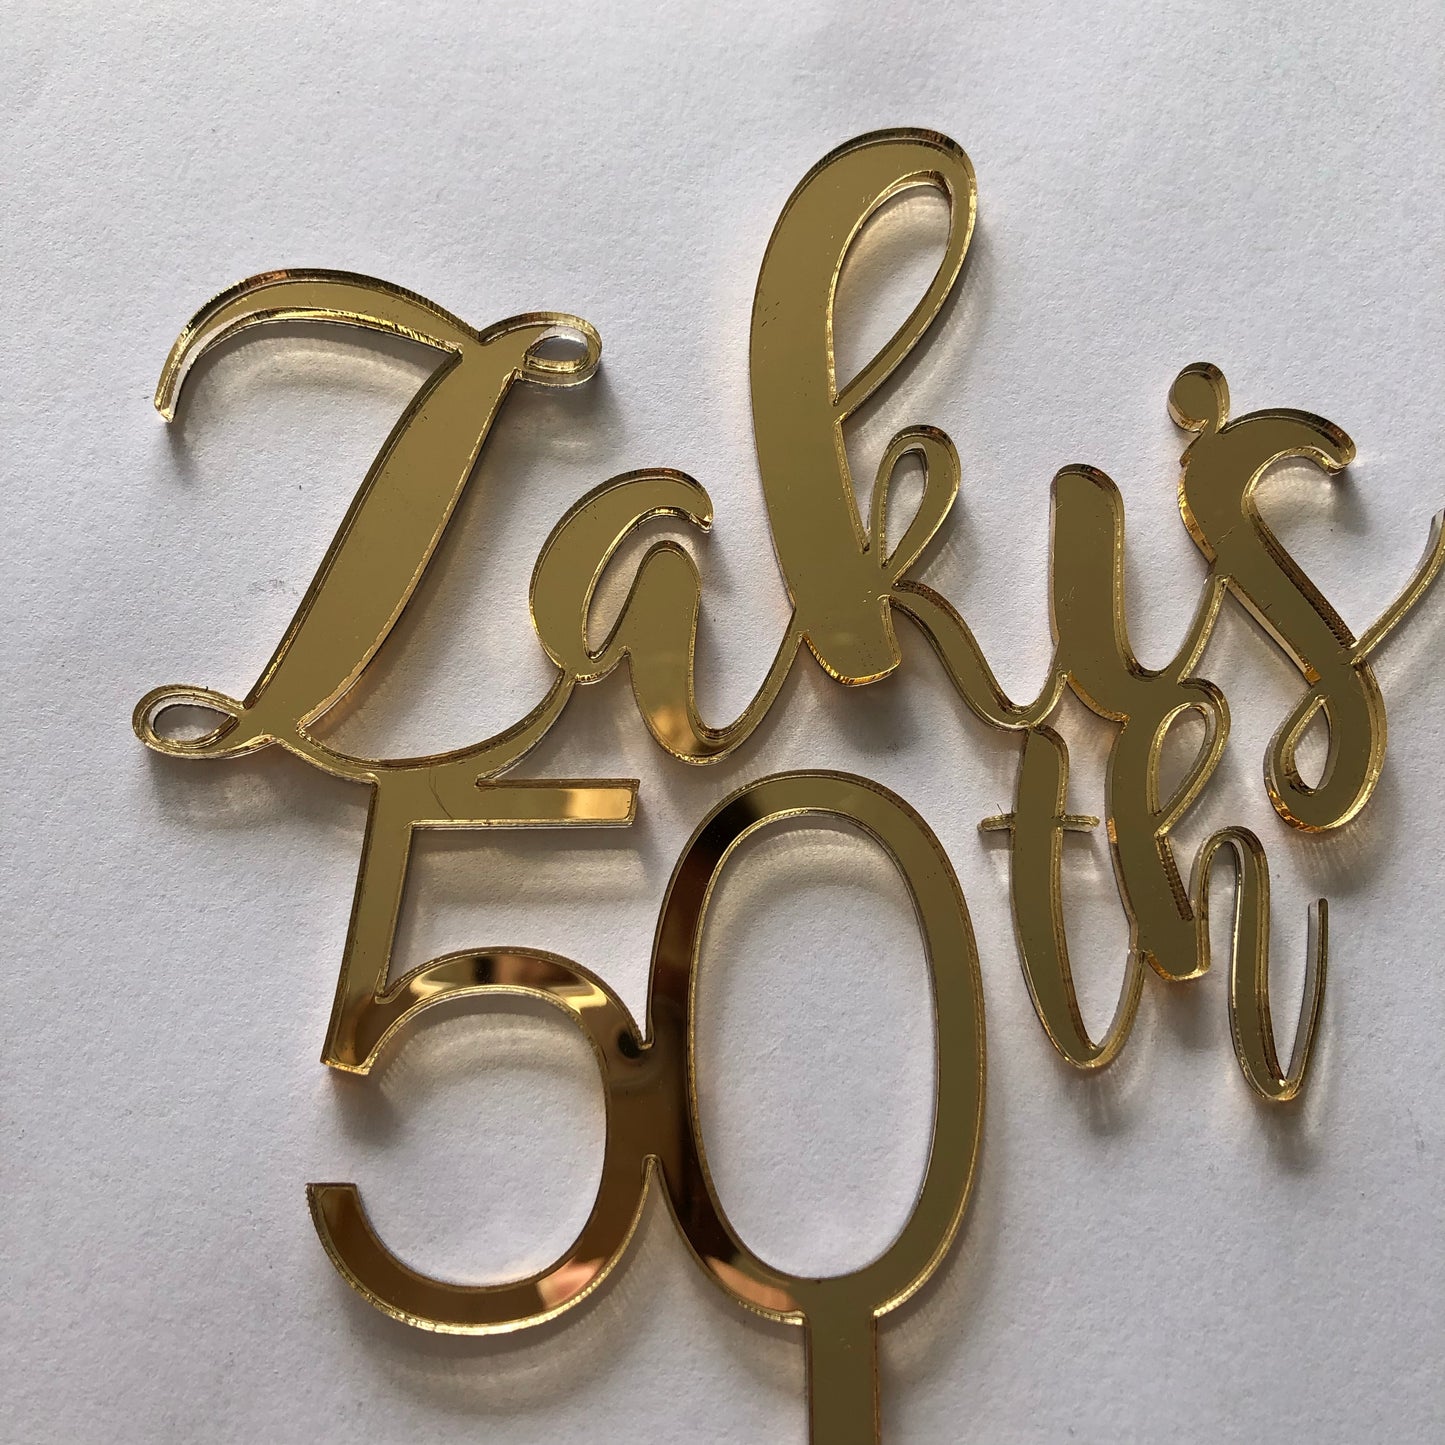 Gold mirror cake topper - Younique Collective